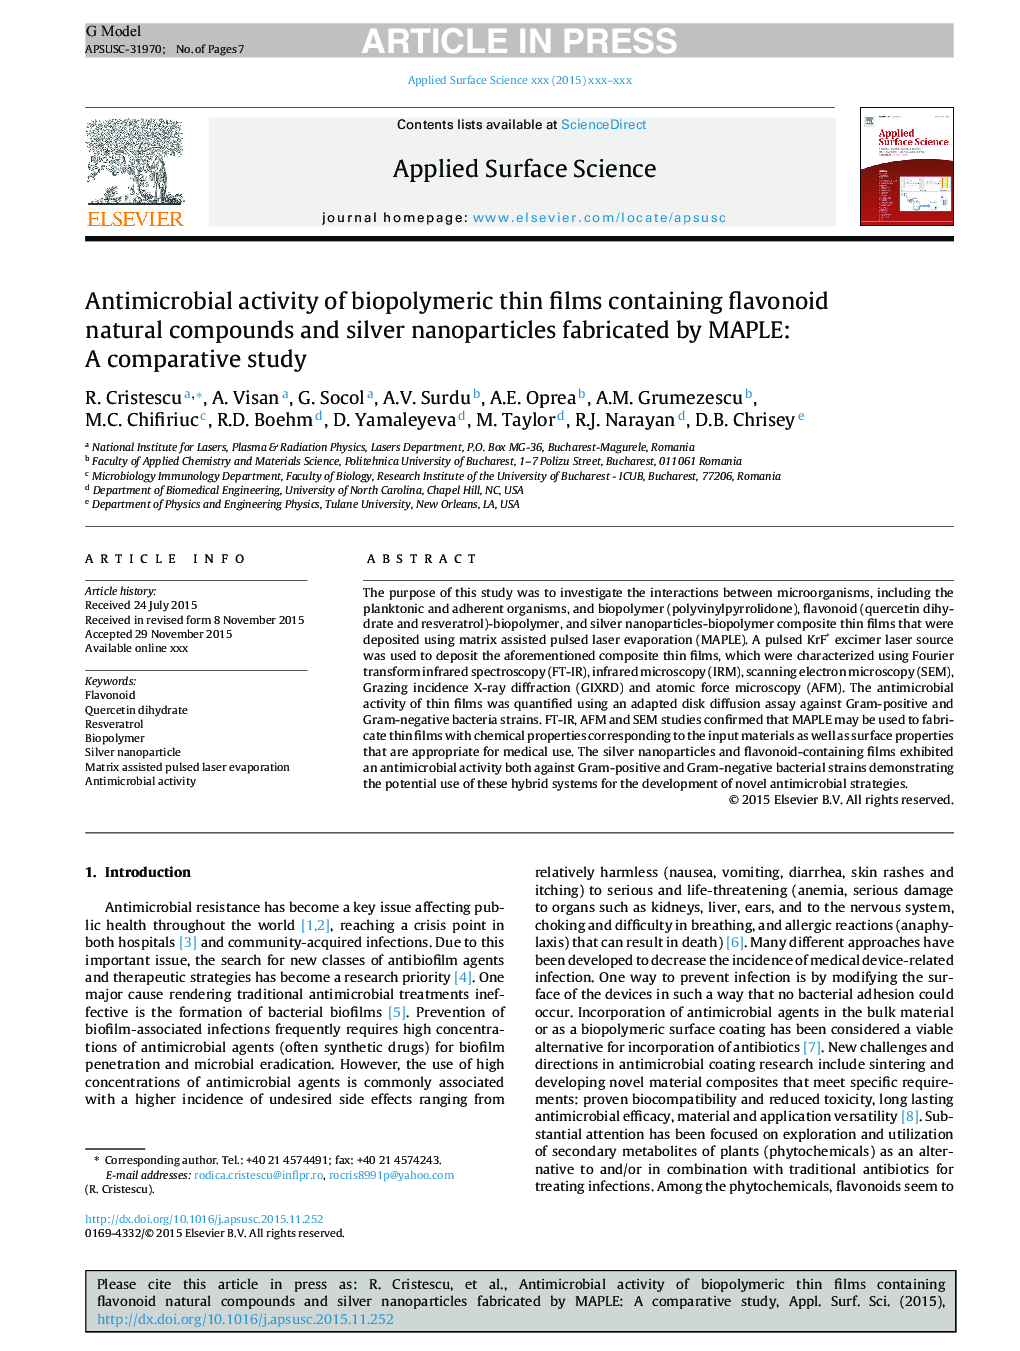 Antimicrobial activity of biopolymeric thin films containing flavonoid natural compounds and silver nanoparticles fabricated by MAPLE: A comparative study